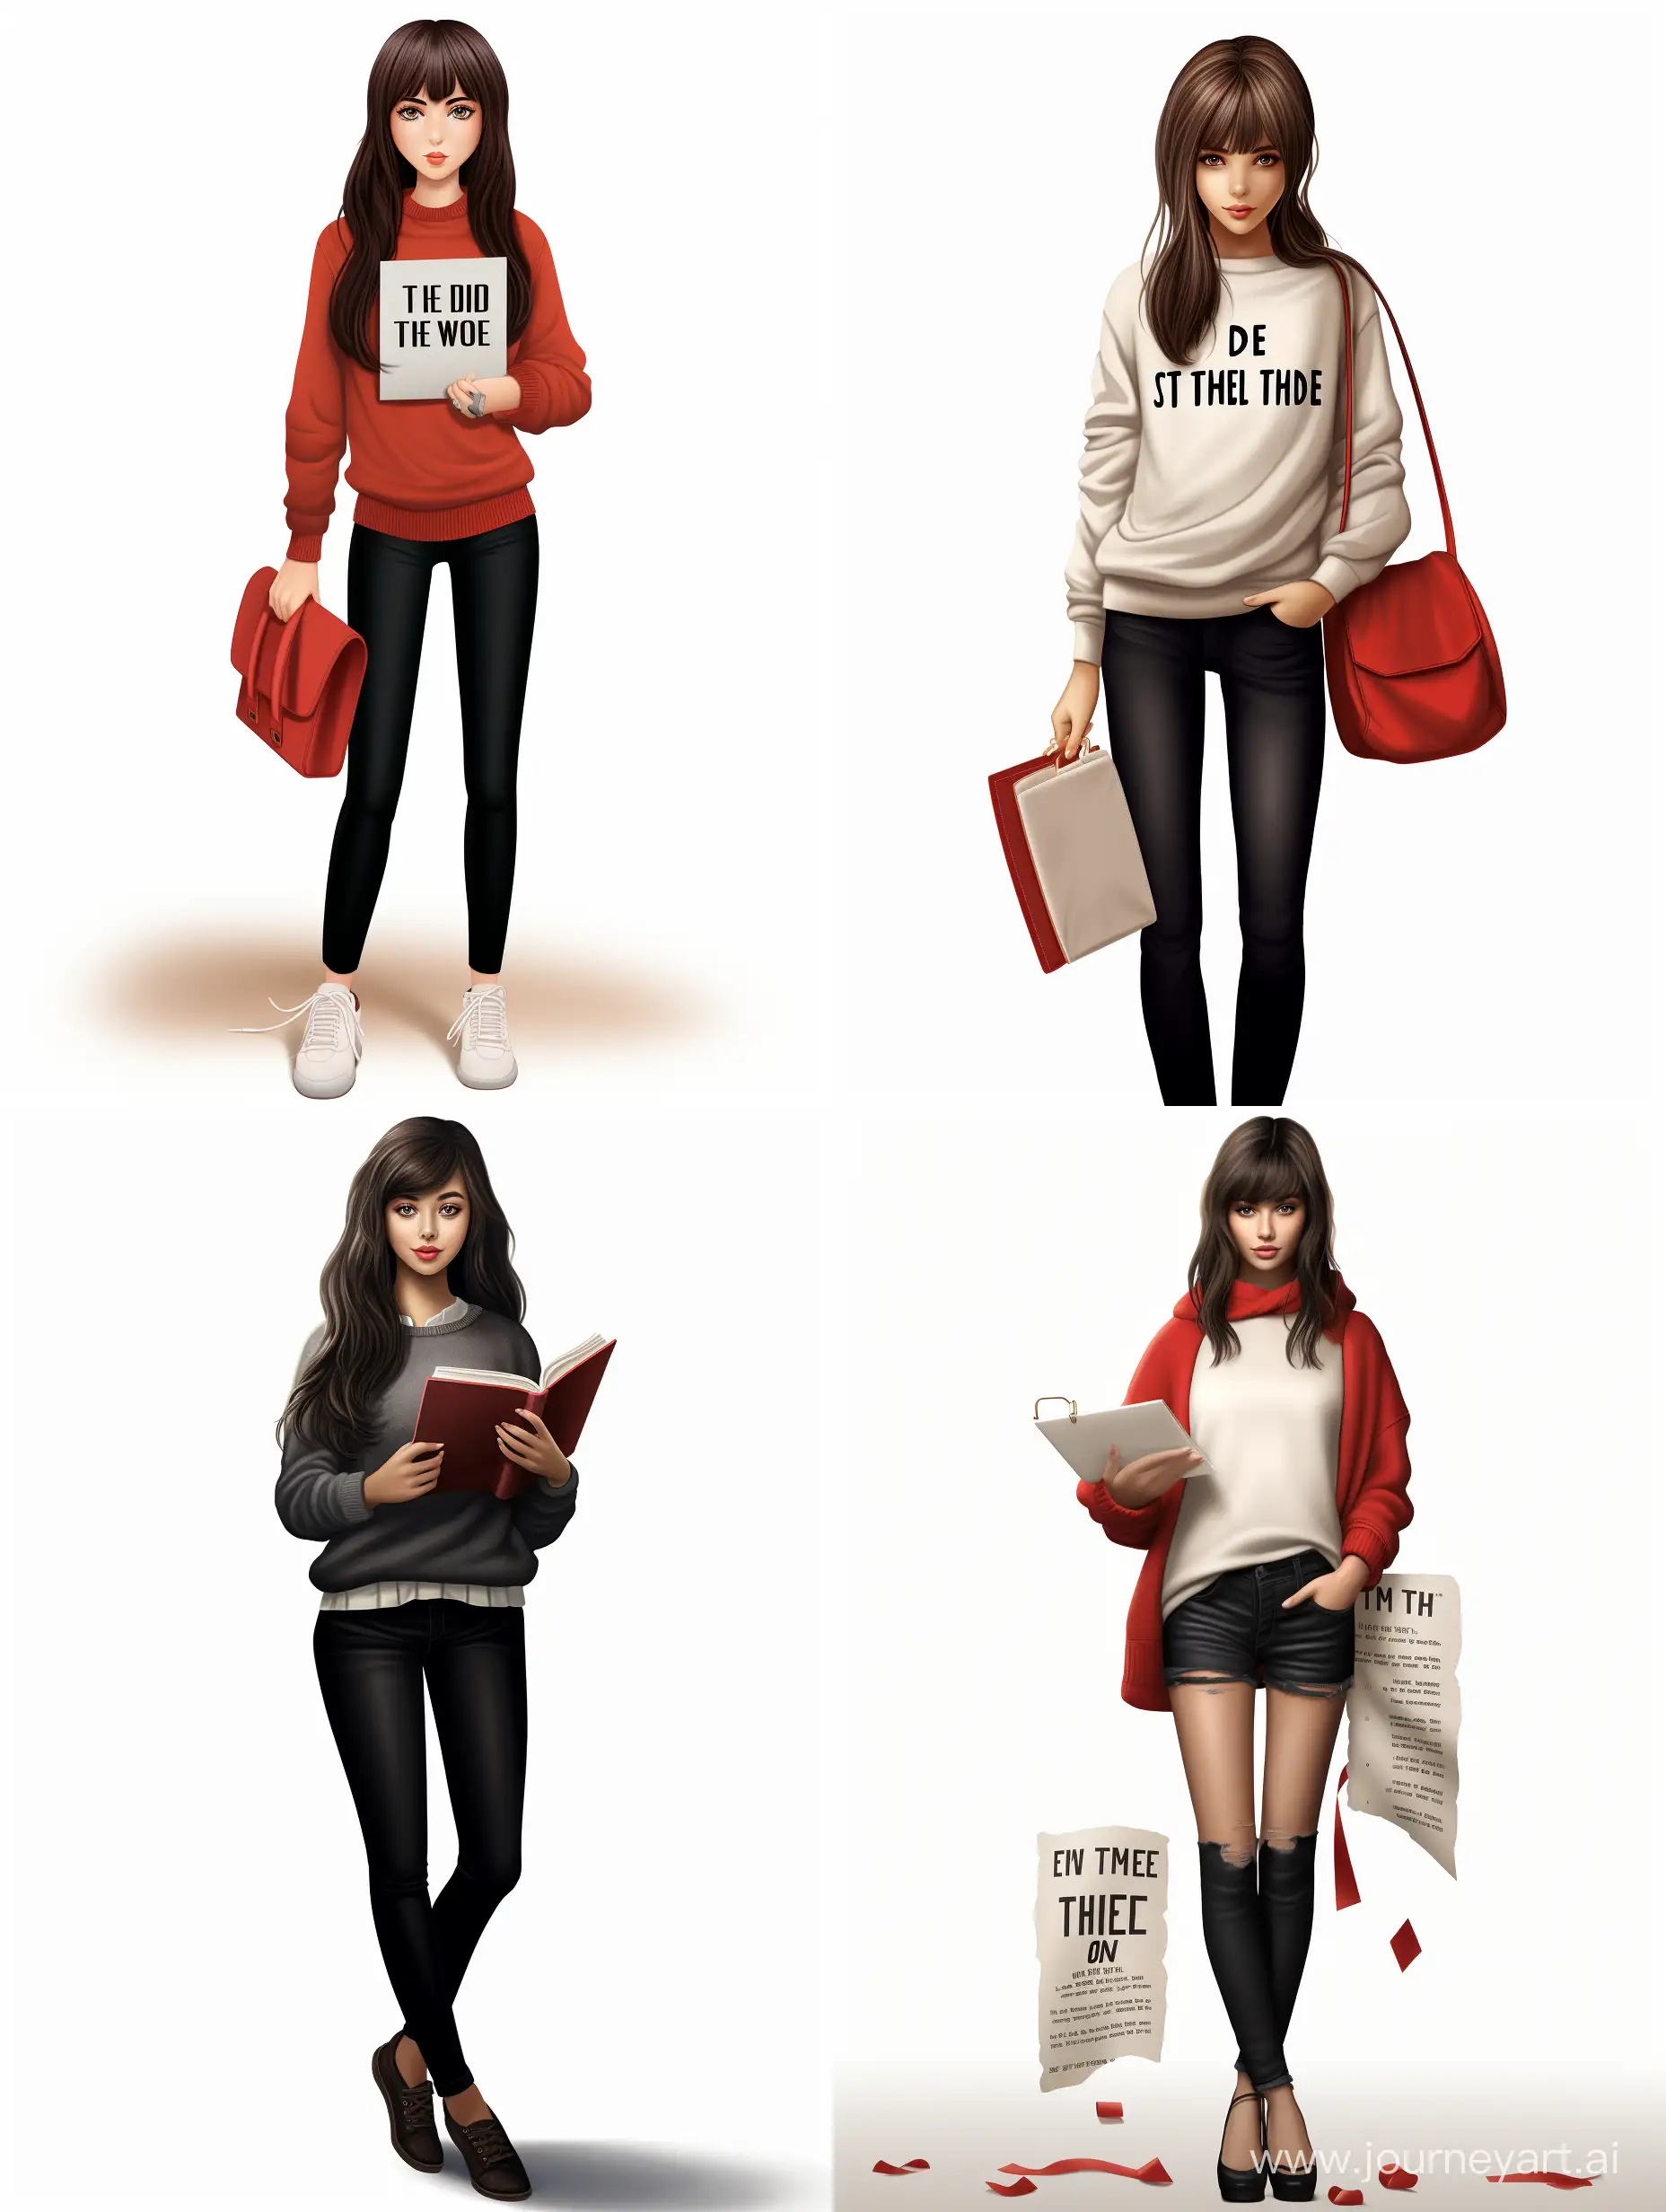 Create a 3D illustration featuring a realistic 18years young handsome girl wearing a white long-sleeved sweaterl , loose black pants and black shoes .She wears a bag in her hand with words " Tsew The Kid'' .Her hair is long to her shoulders with bangs that do not extend past her eyebrows.  His hair should be red but dark in color. She is sitting on an social media logo .  The character background is a mock-up of their social media profile page with a profile name "Li Yori" and a profile picture identical to the character.  Soft light reflection

